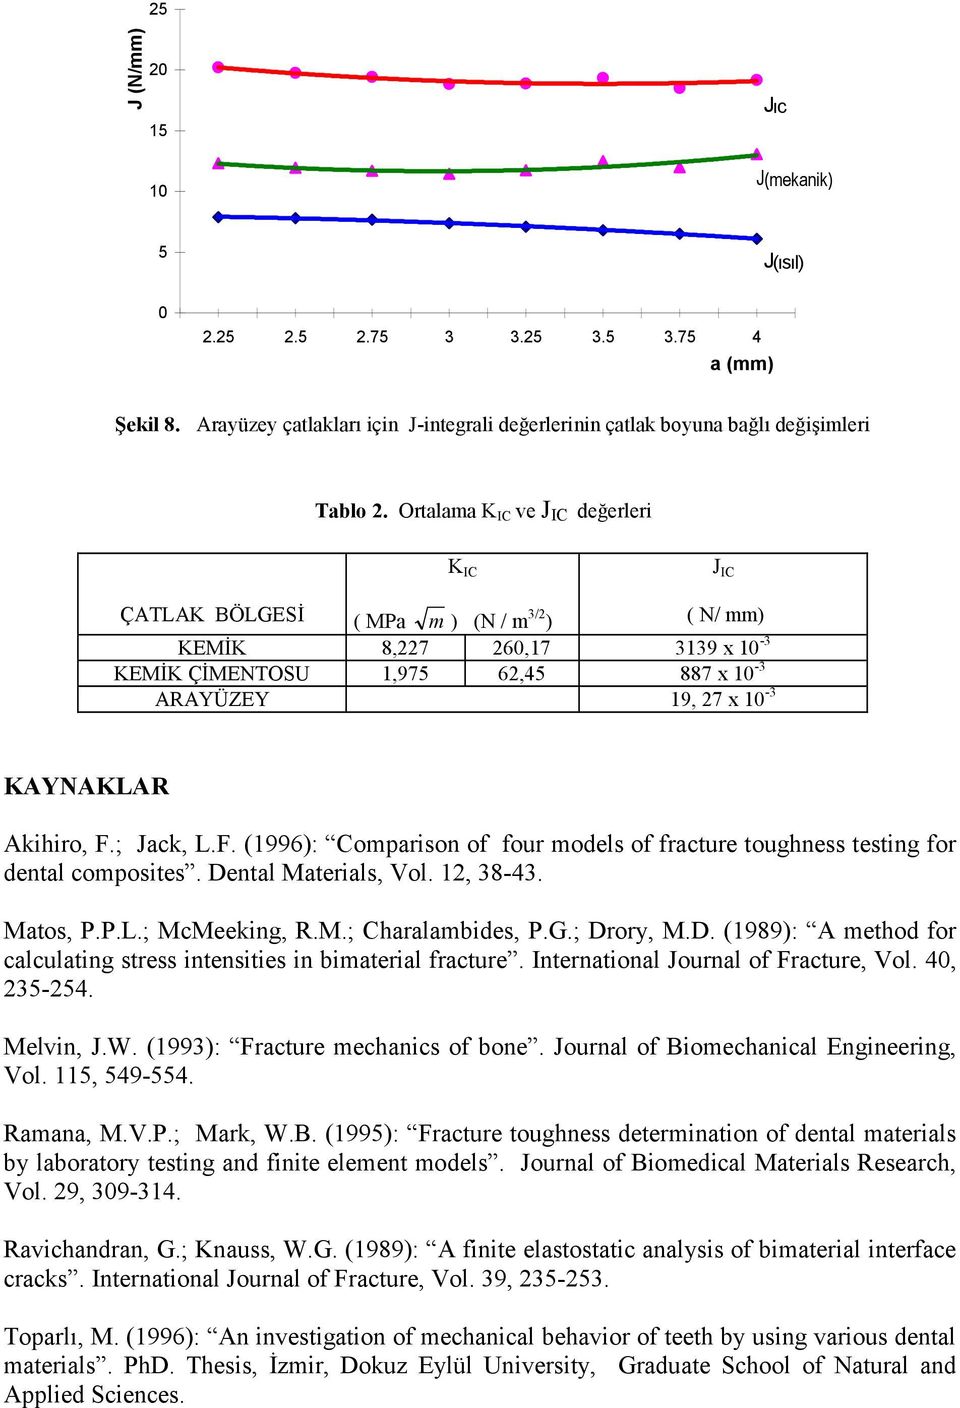 F. (996): Comparison of four models of fracture toughness testing for dental composites. Dental Materials, Vol., 38-43. Matos, P.P.L.; McMeeking, R.M.; Charalambides, P.G.; Drory, M.D. (989): A method for calculating stress intensities in bimaterial fracture.